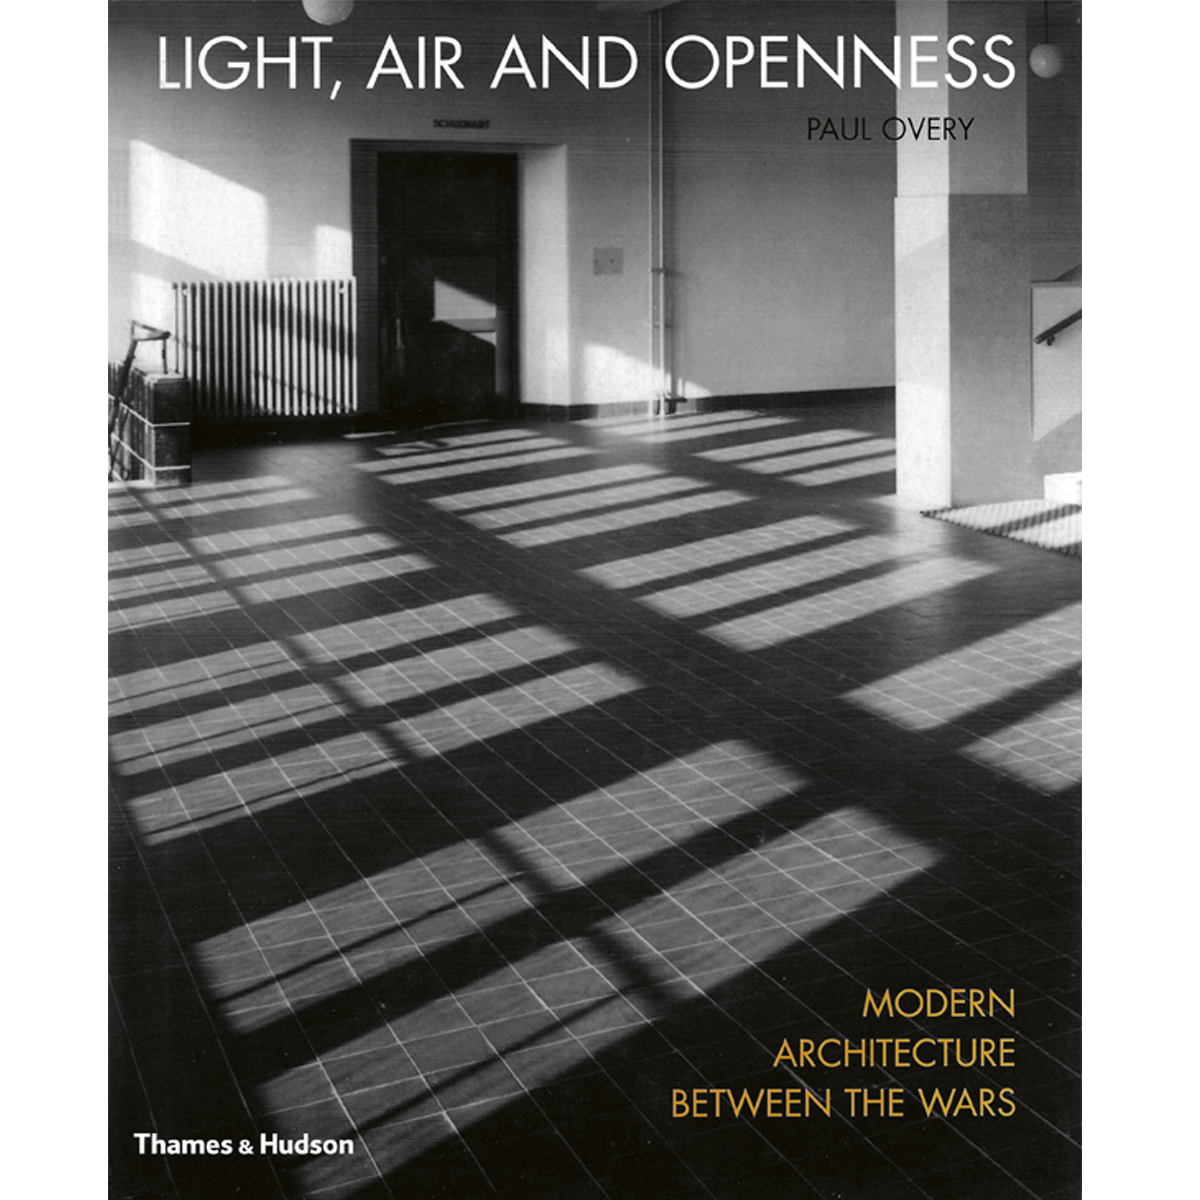 Light, Air and Openness